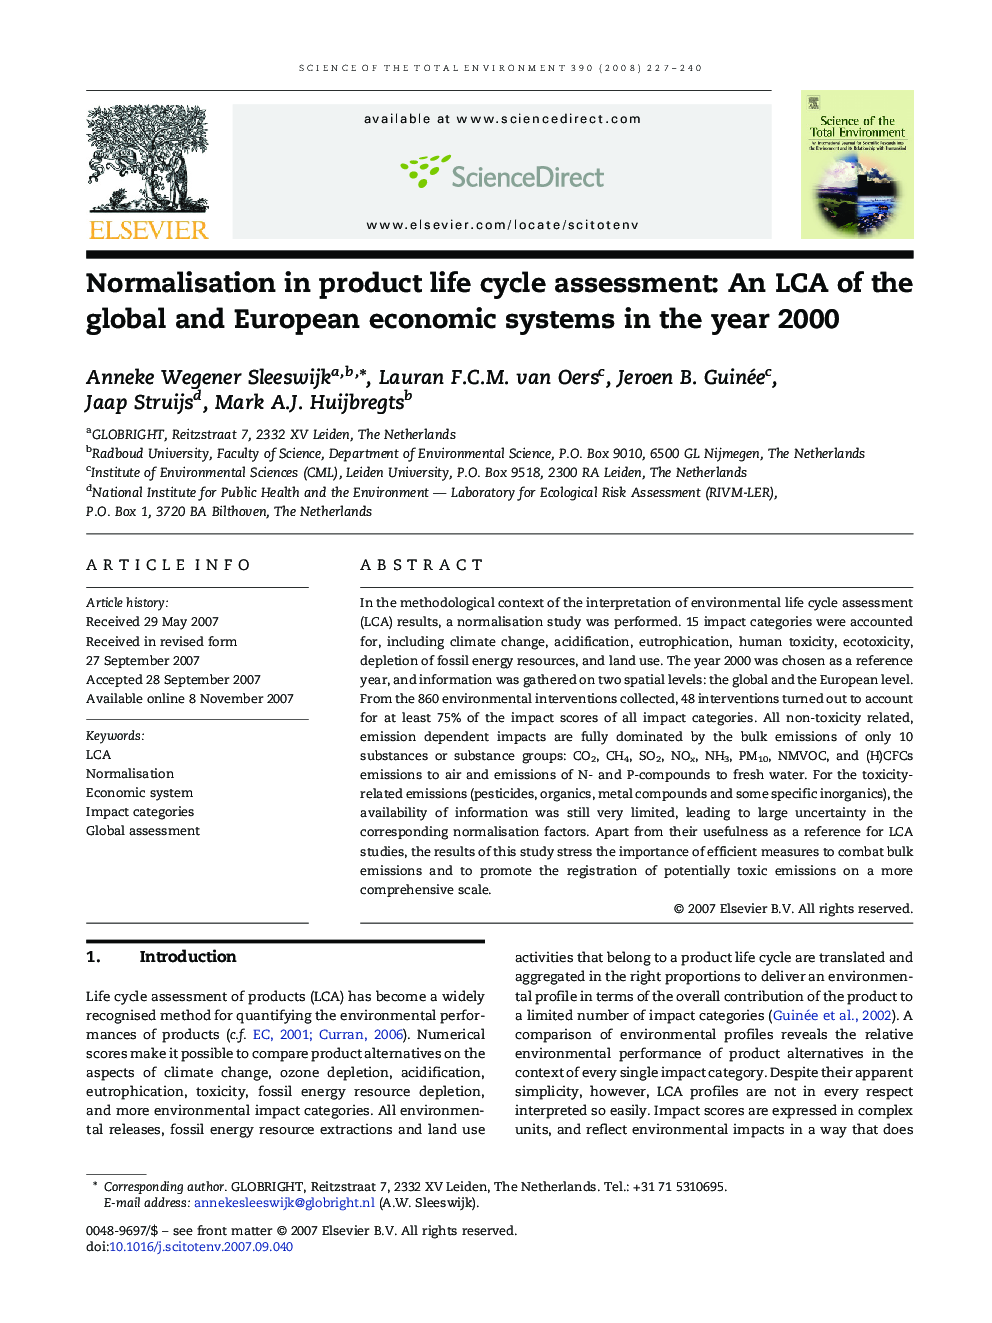 Normalisation in product life cycle assessment: An LCA of the global and European economic systems in the year 2000